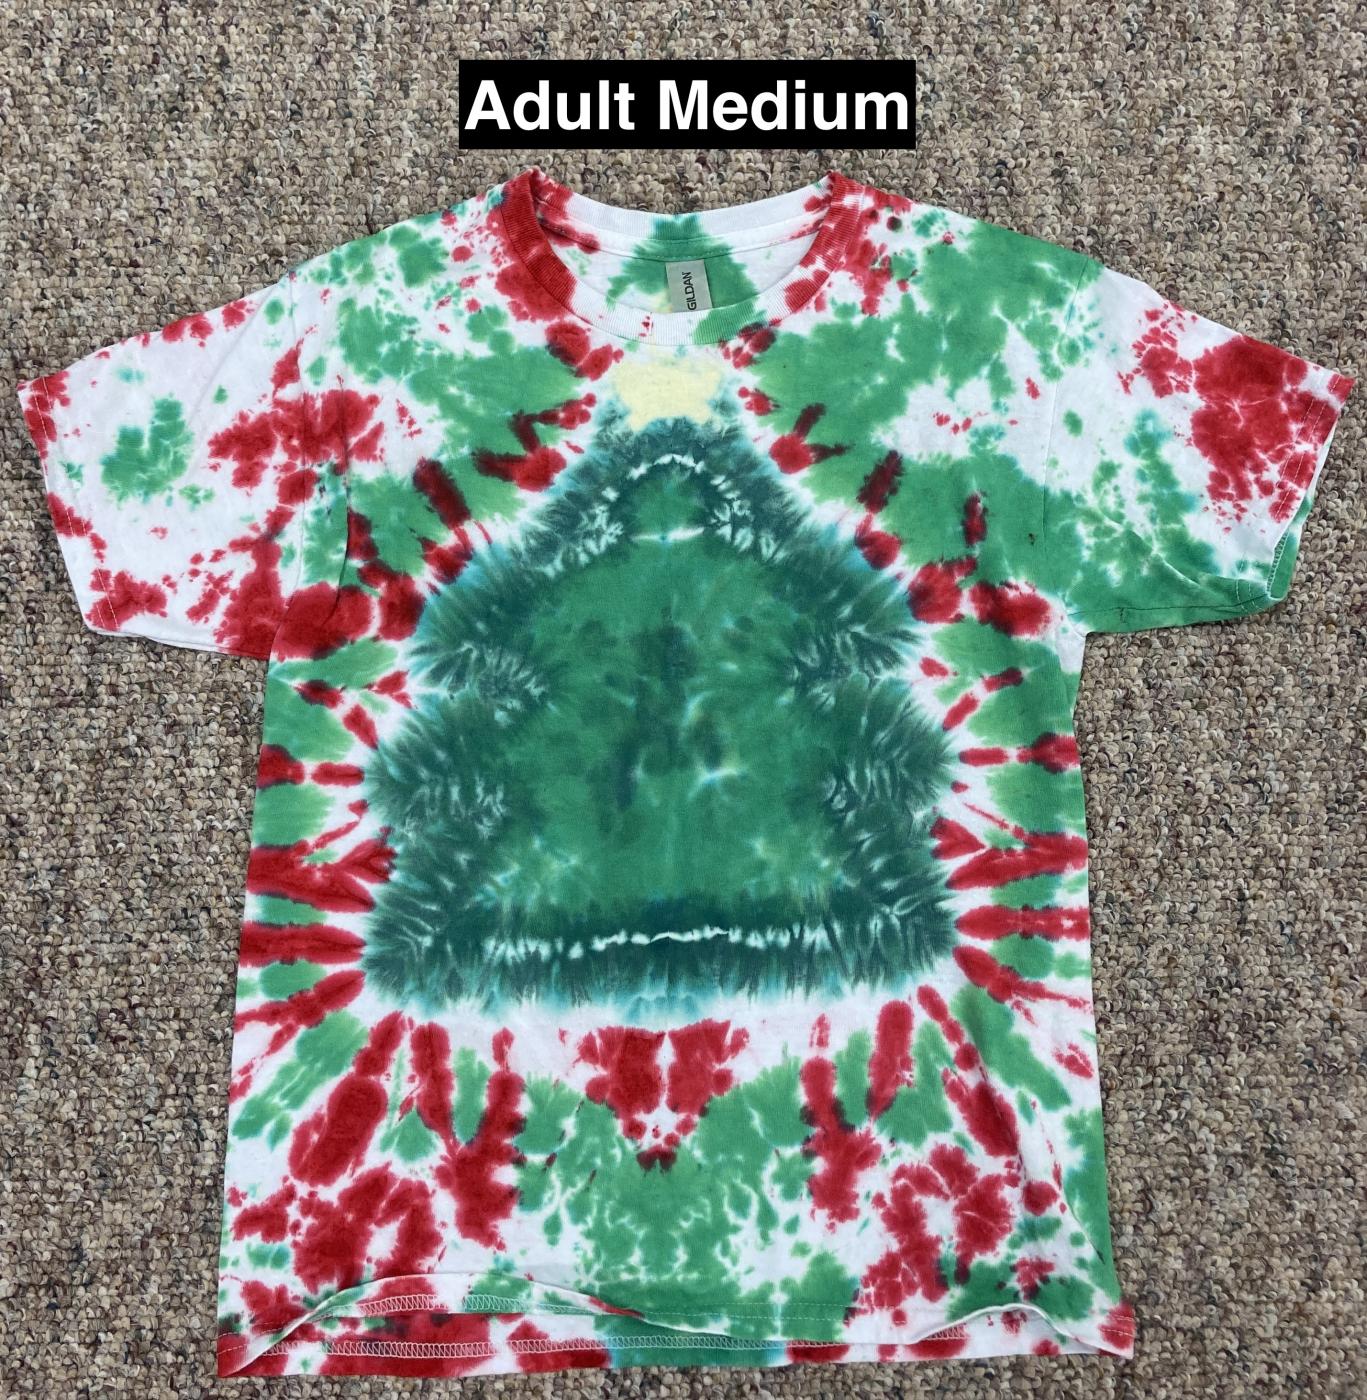 Christmas Tree with Red Green Crinkle Tie Dye T Shirt Adult Medium